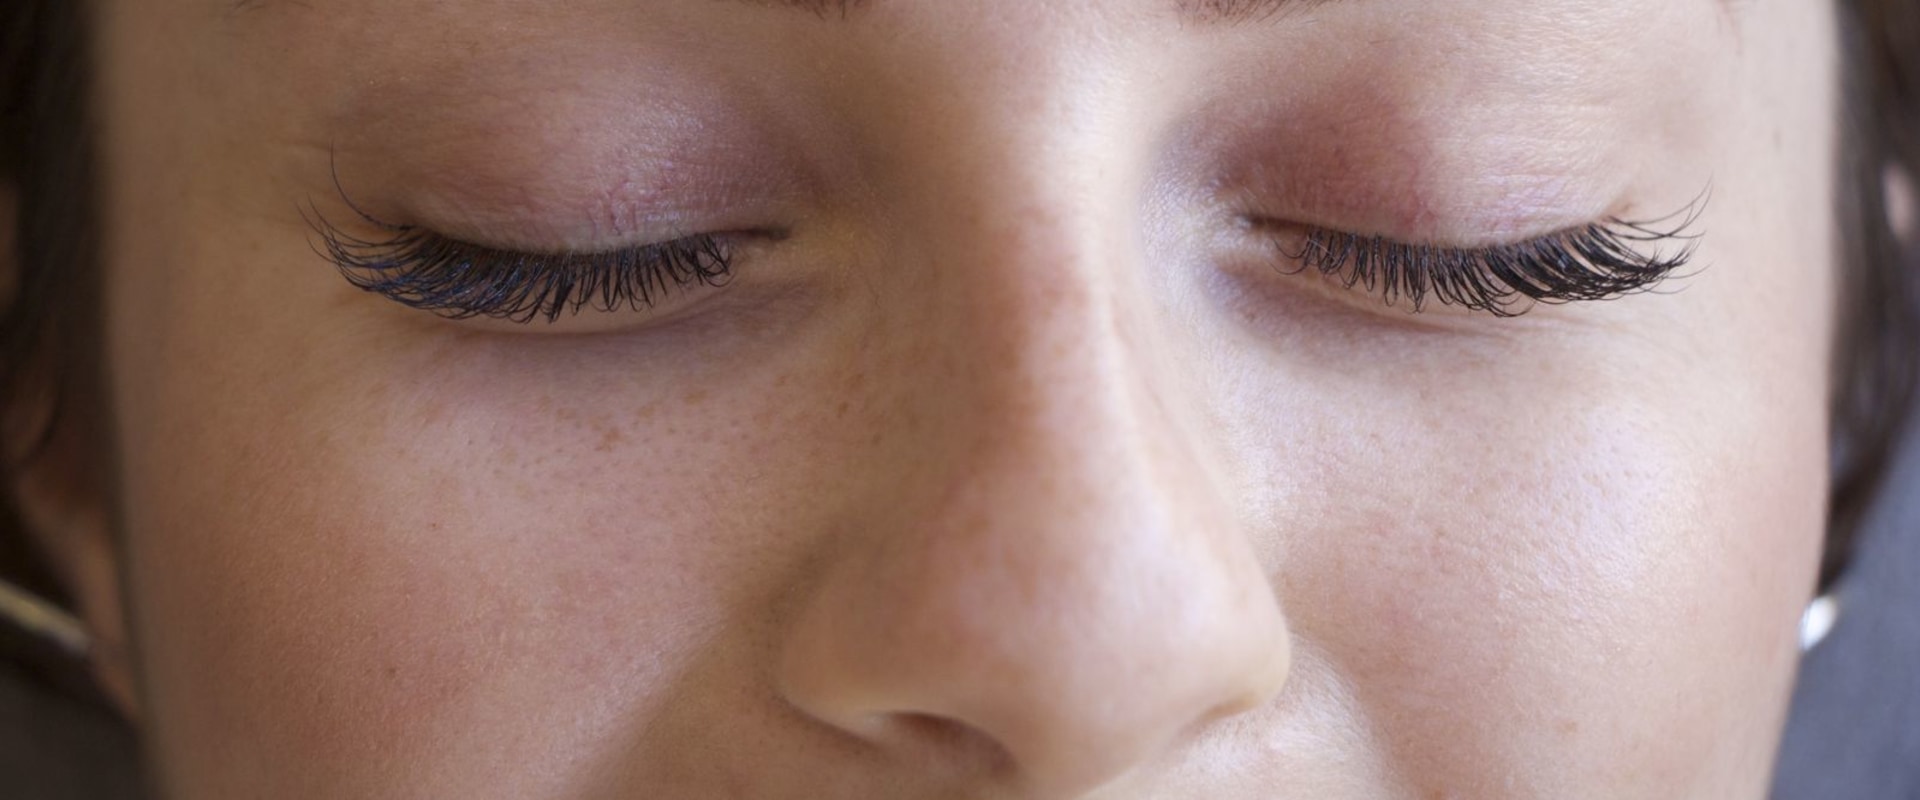 Do lash extensions make your lashes shorter?